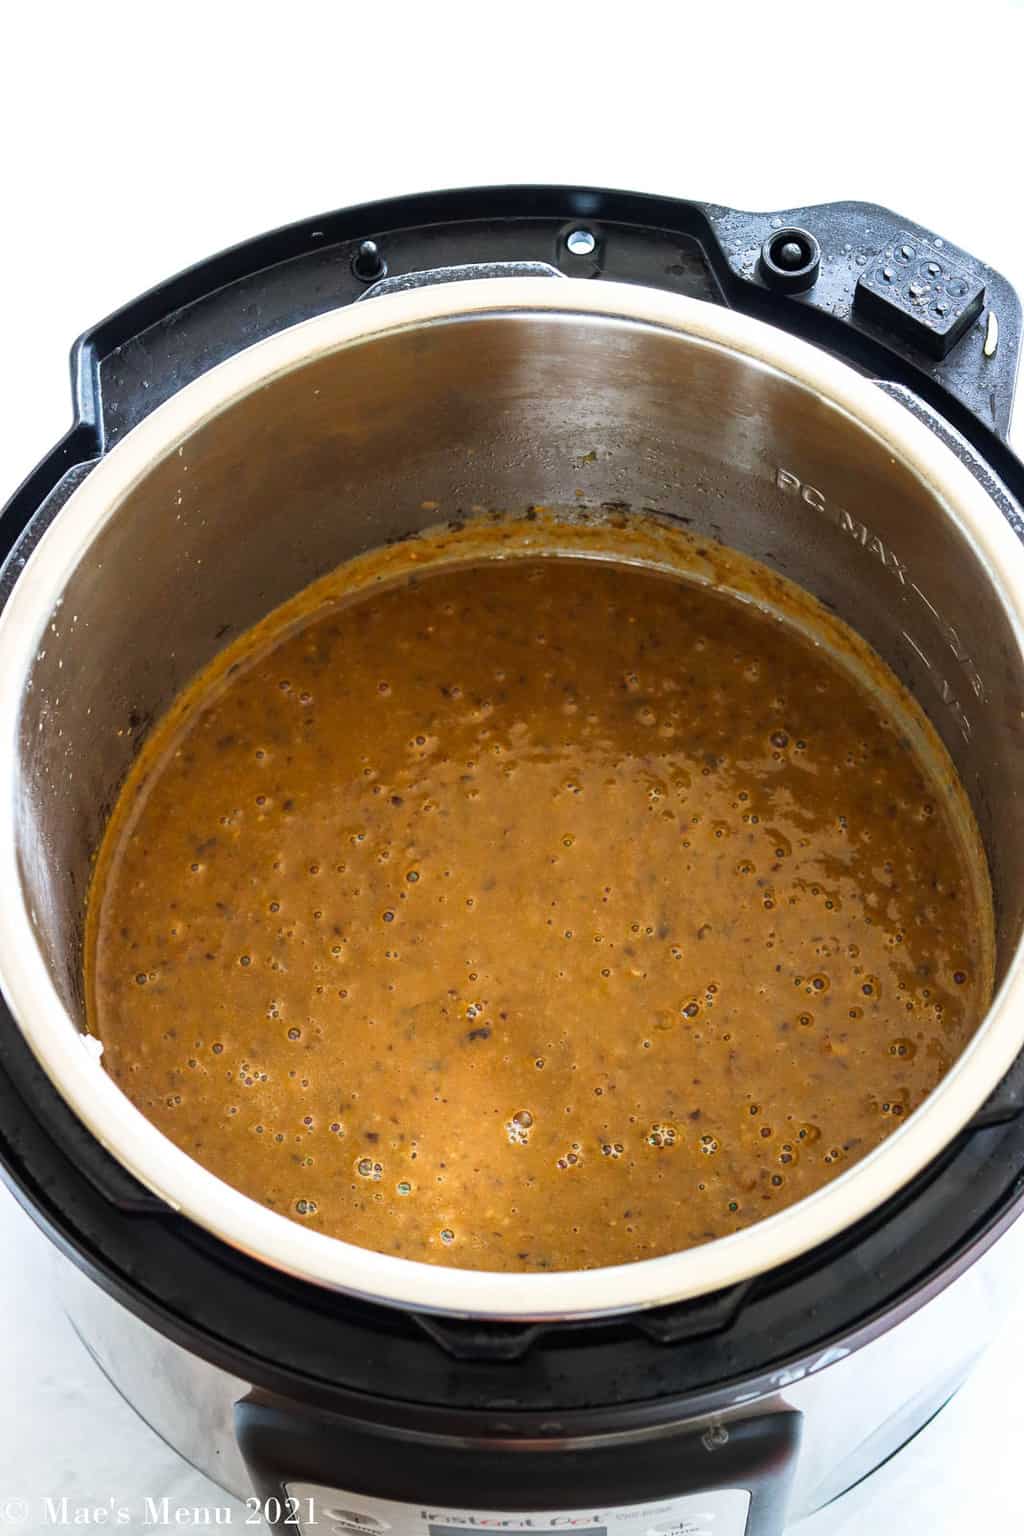 Blended bean soup in an Instant pot